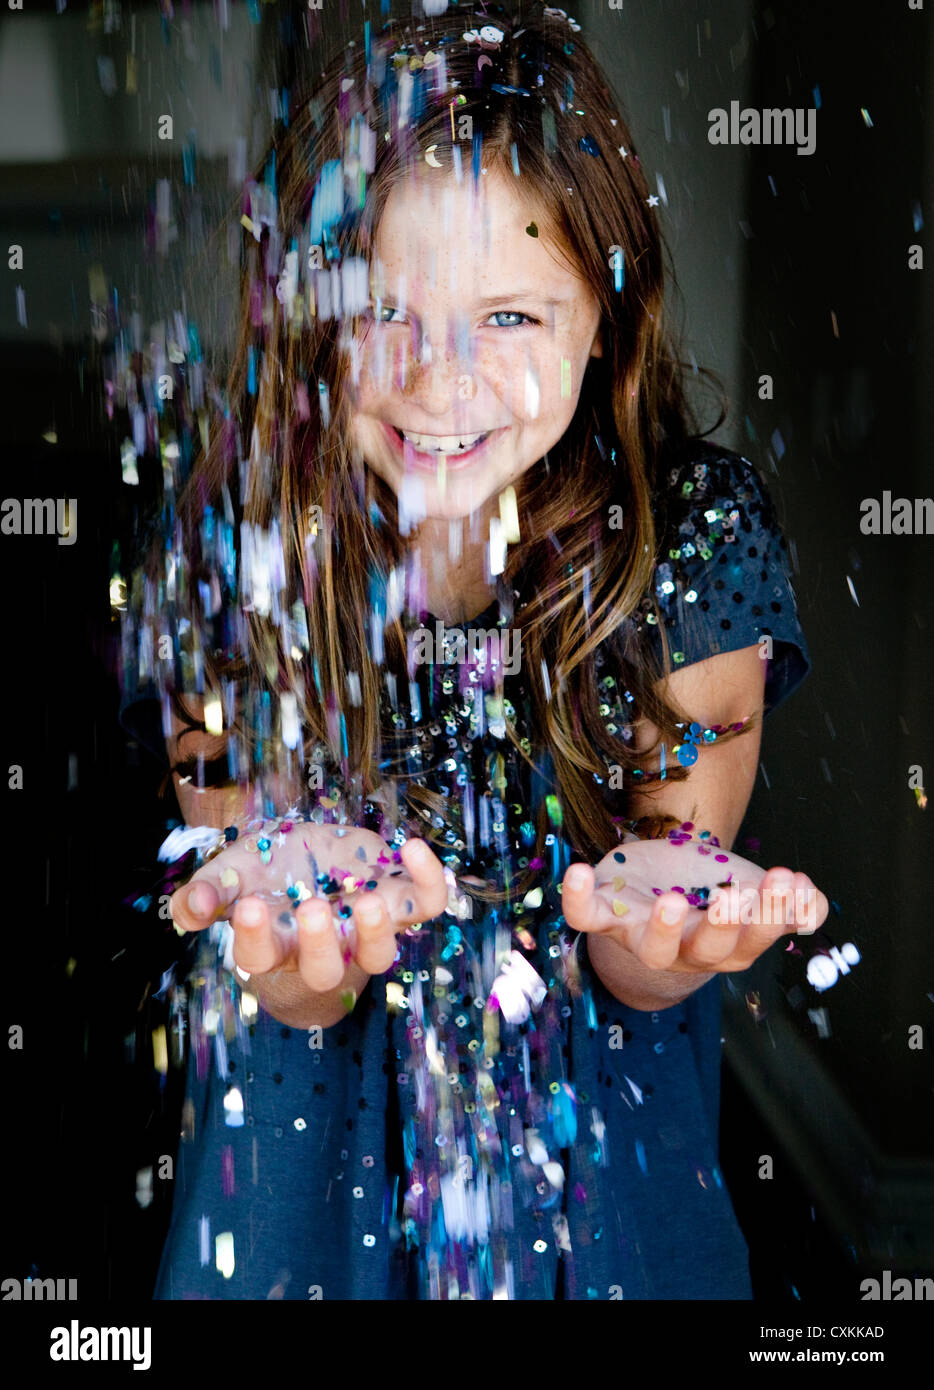 Glitter sprinkling down on young girl Stock Photo